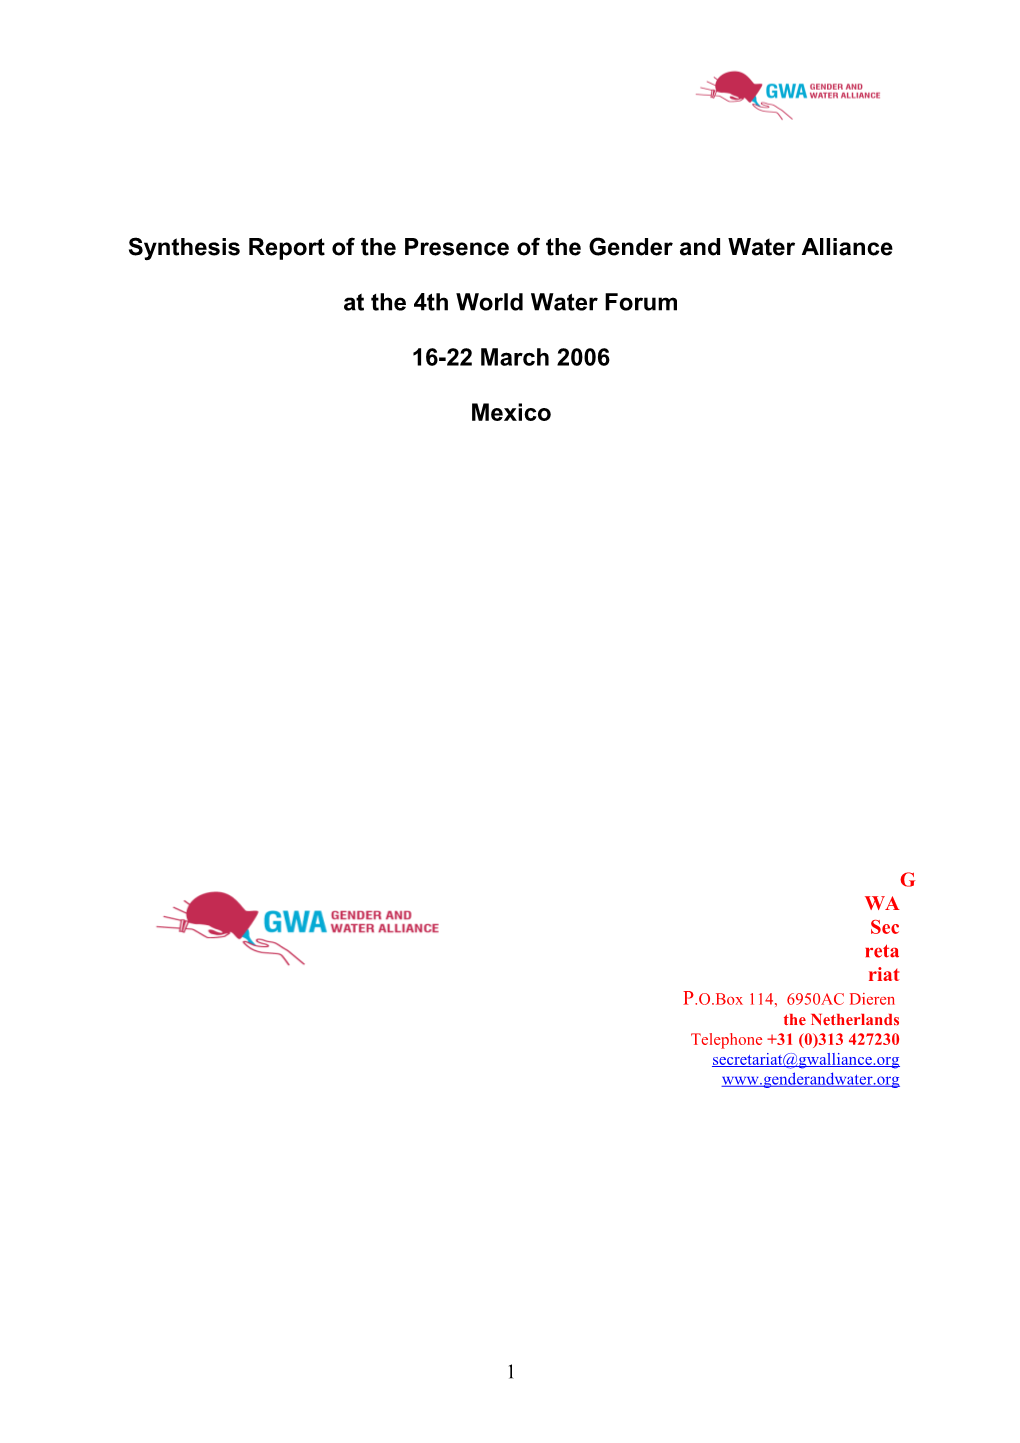 Synthesis Report of the Participation of the Gender and Water Alliance at the 4Th World